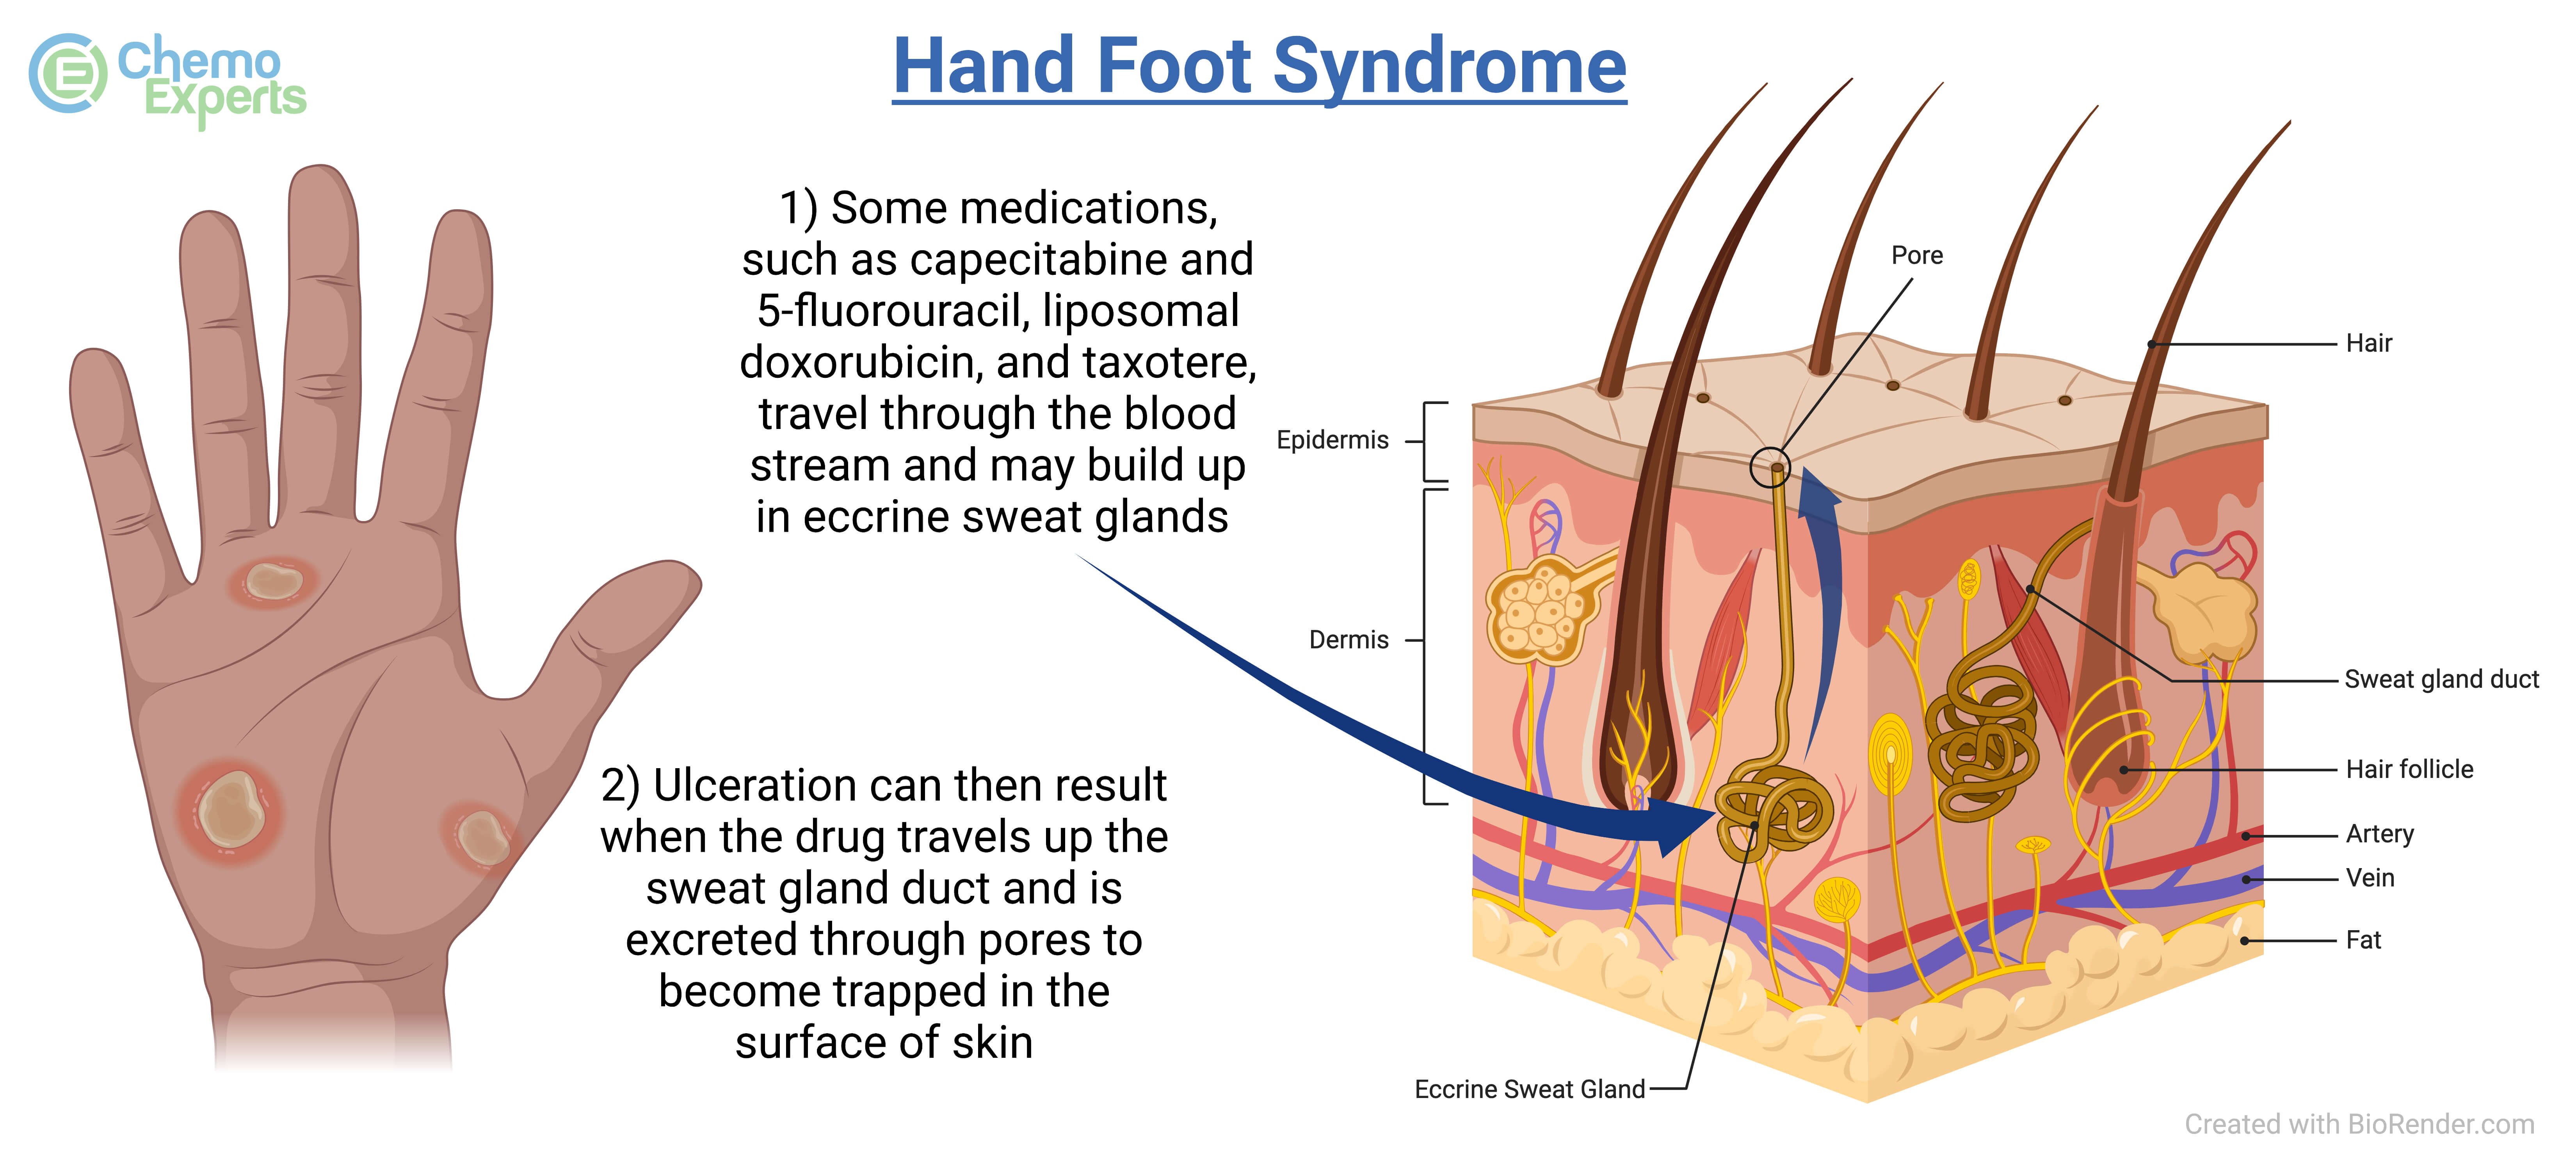 Hand and Foot Pain: Causes and Treatments